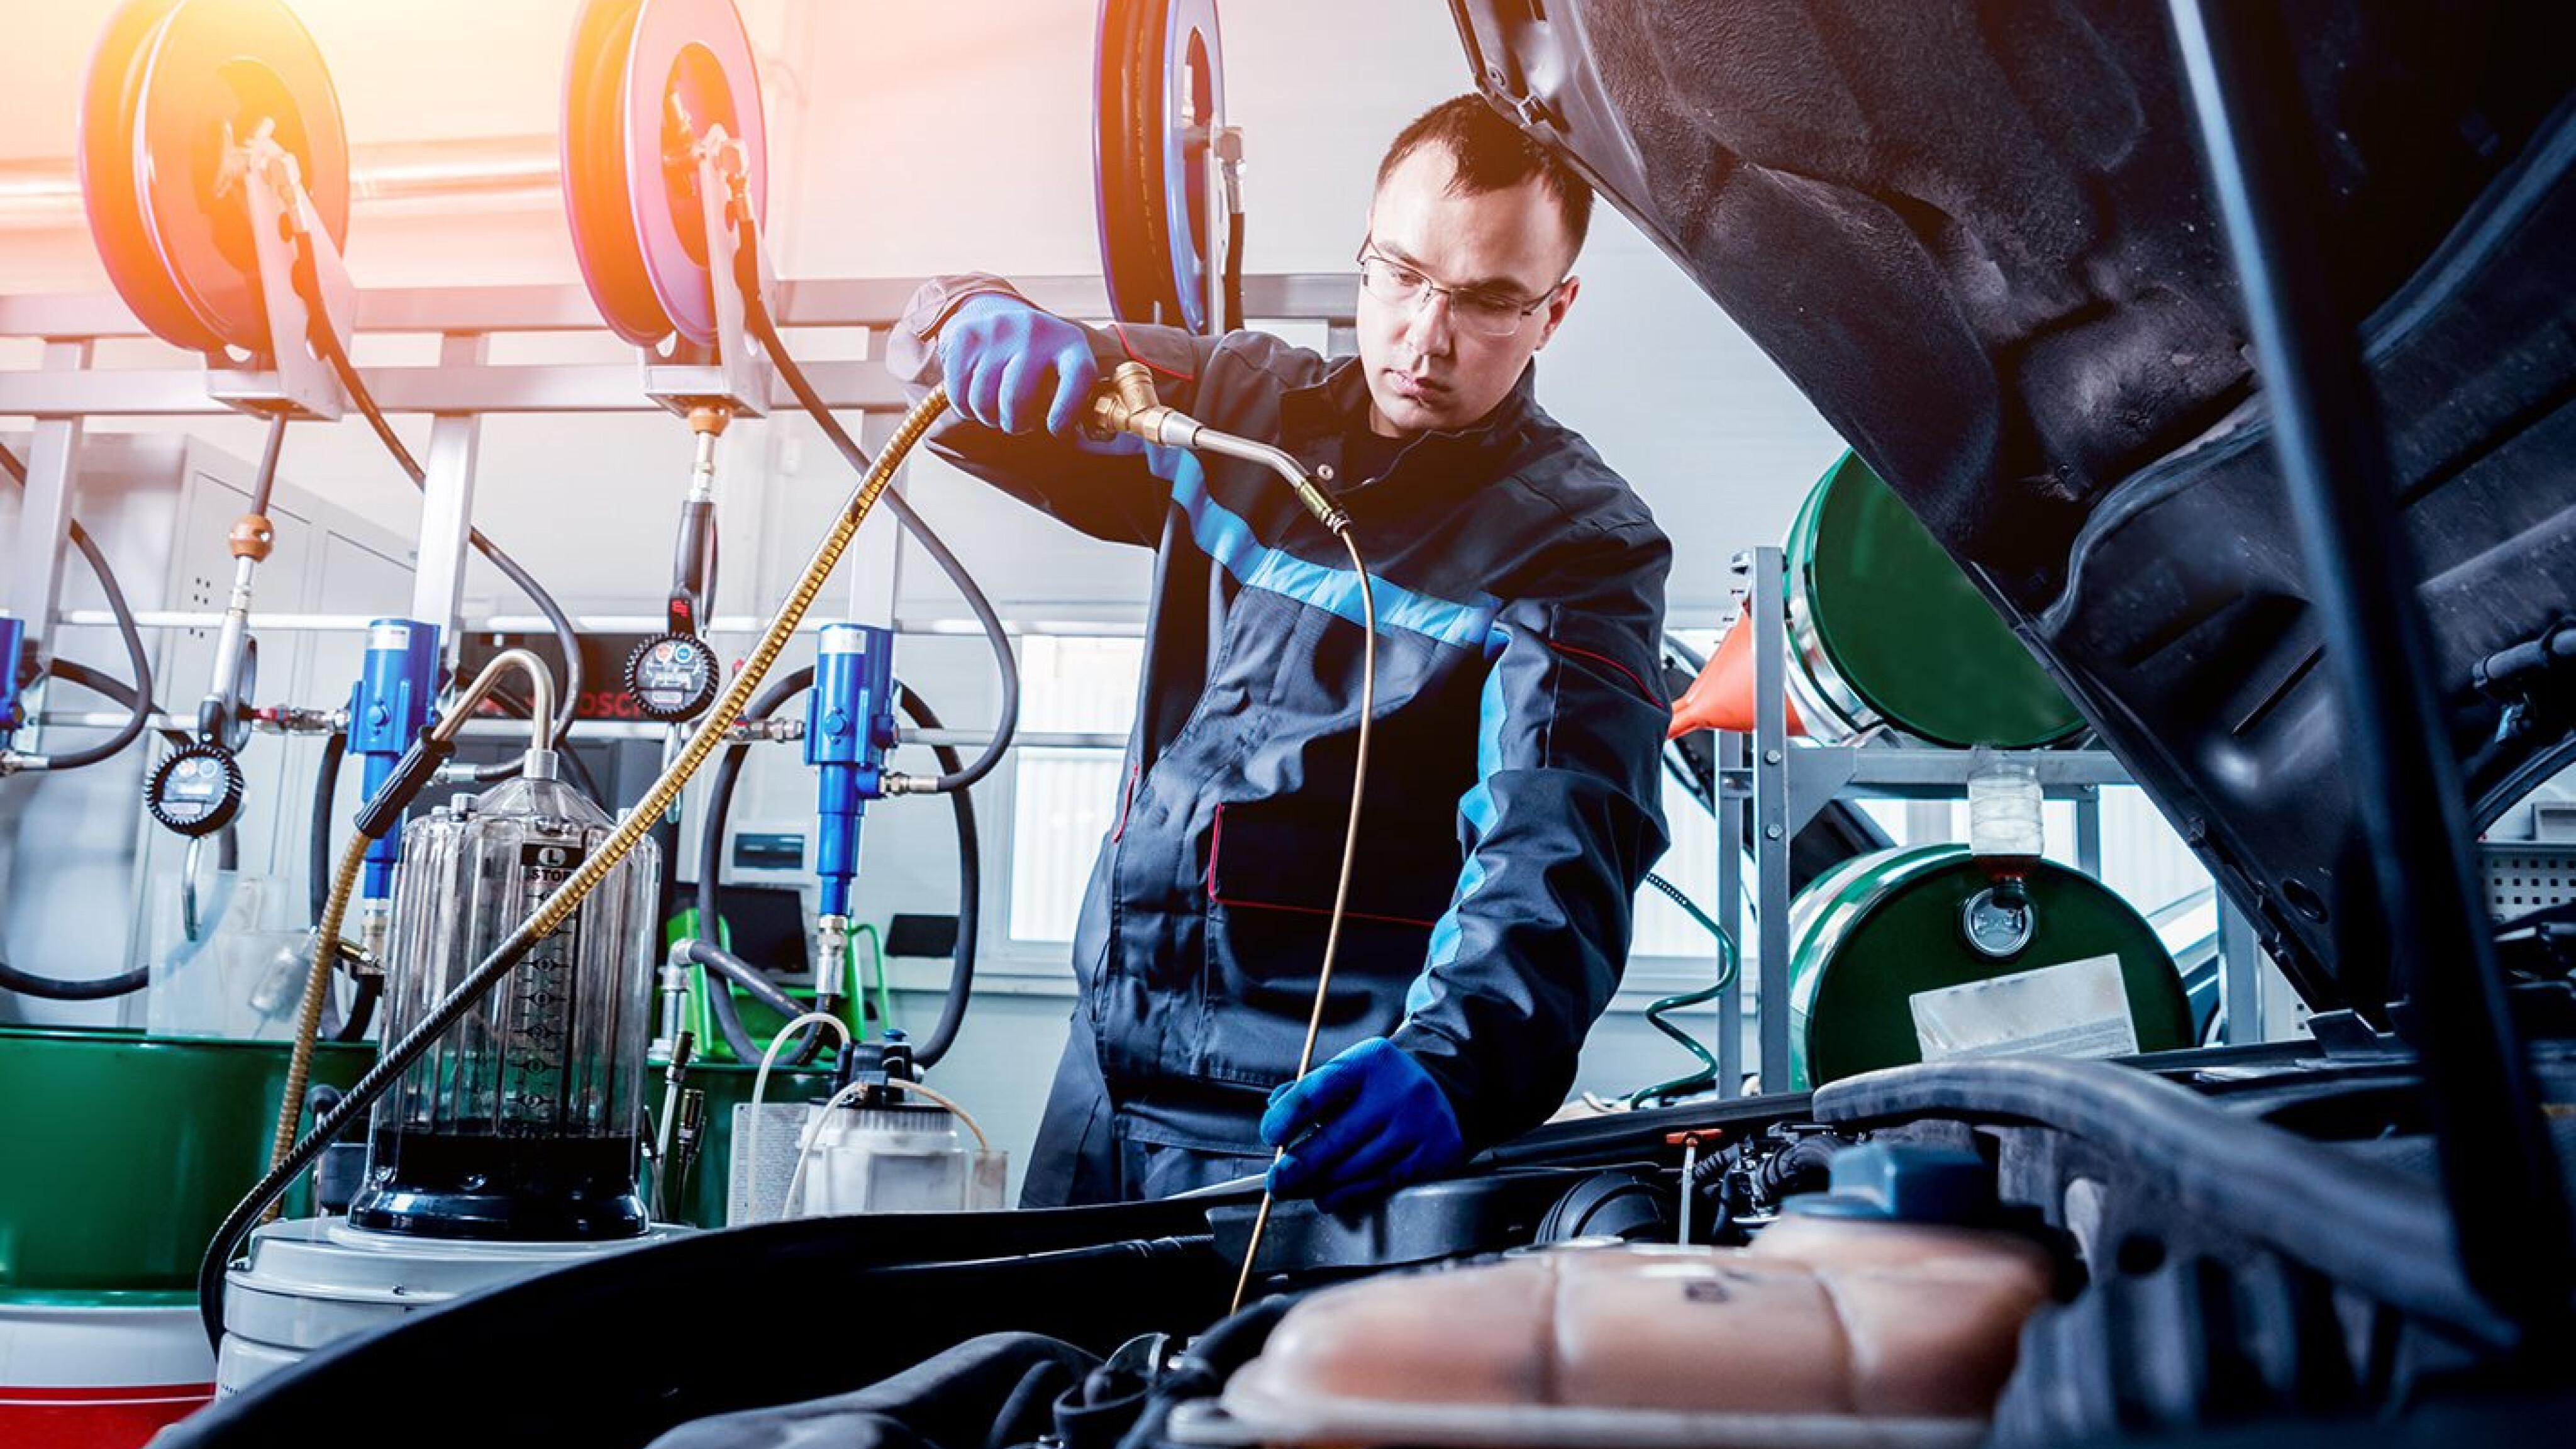 An automotive technician using a long tube to refill oil